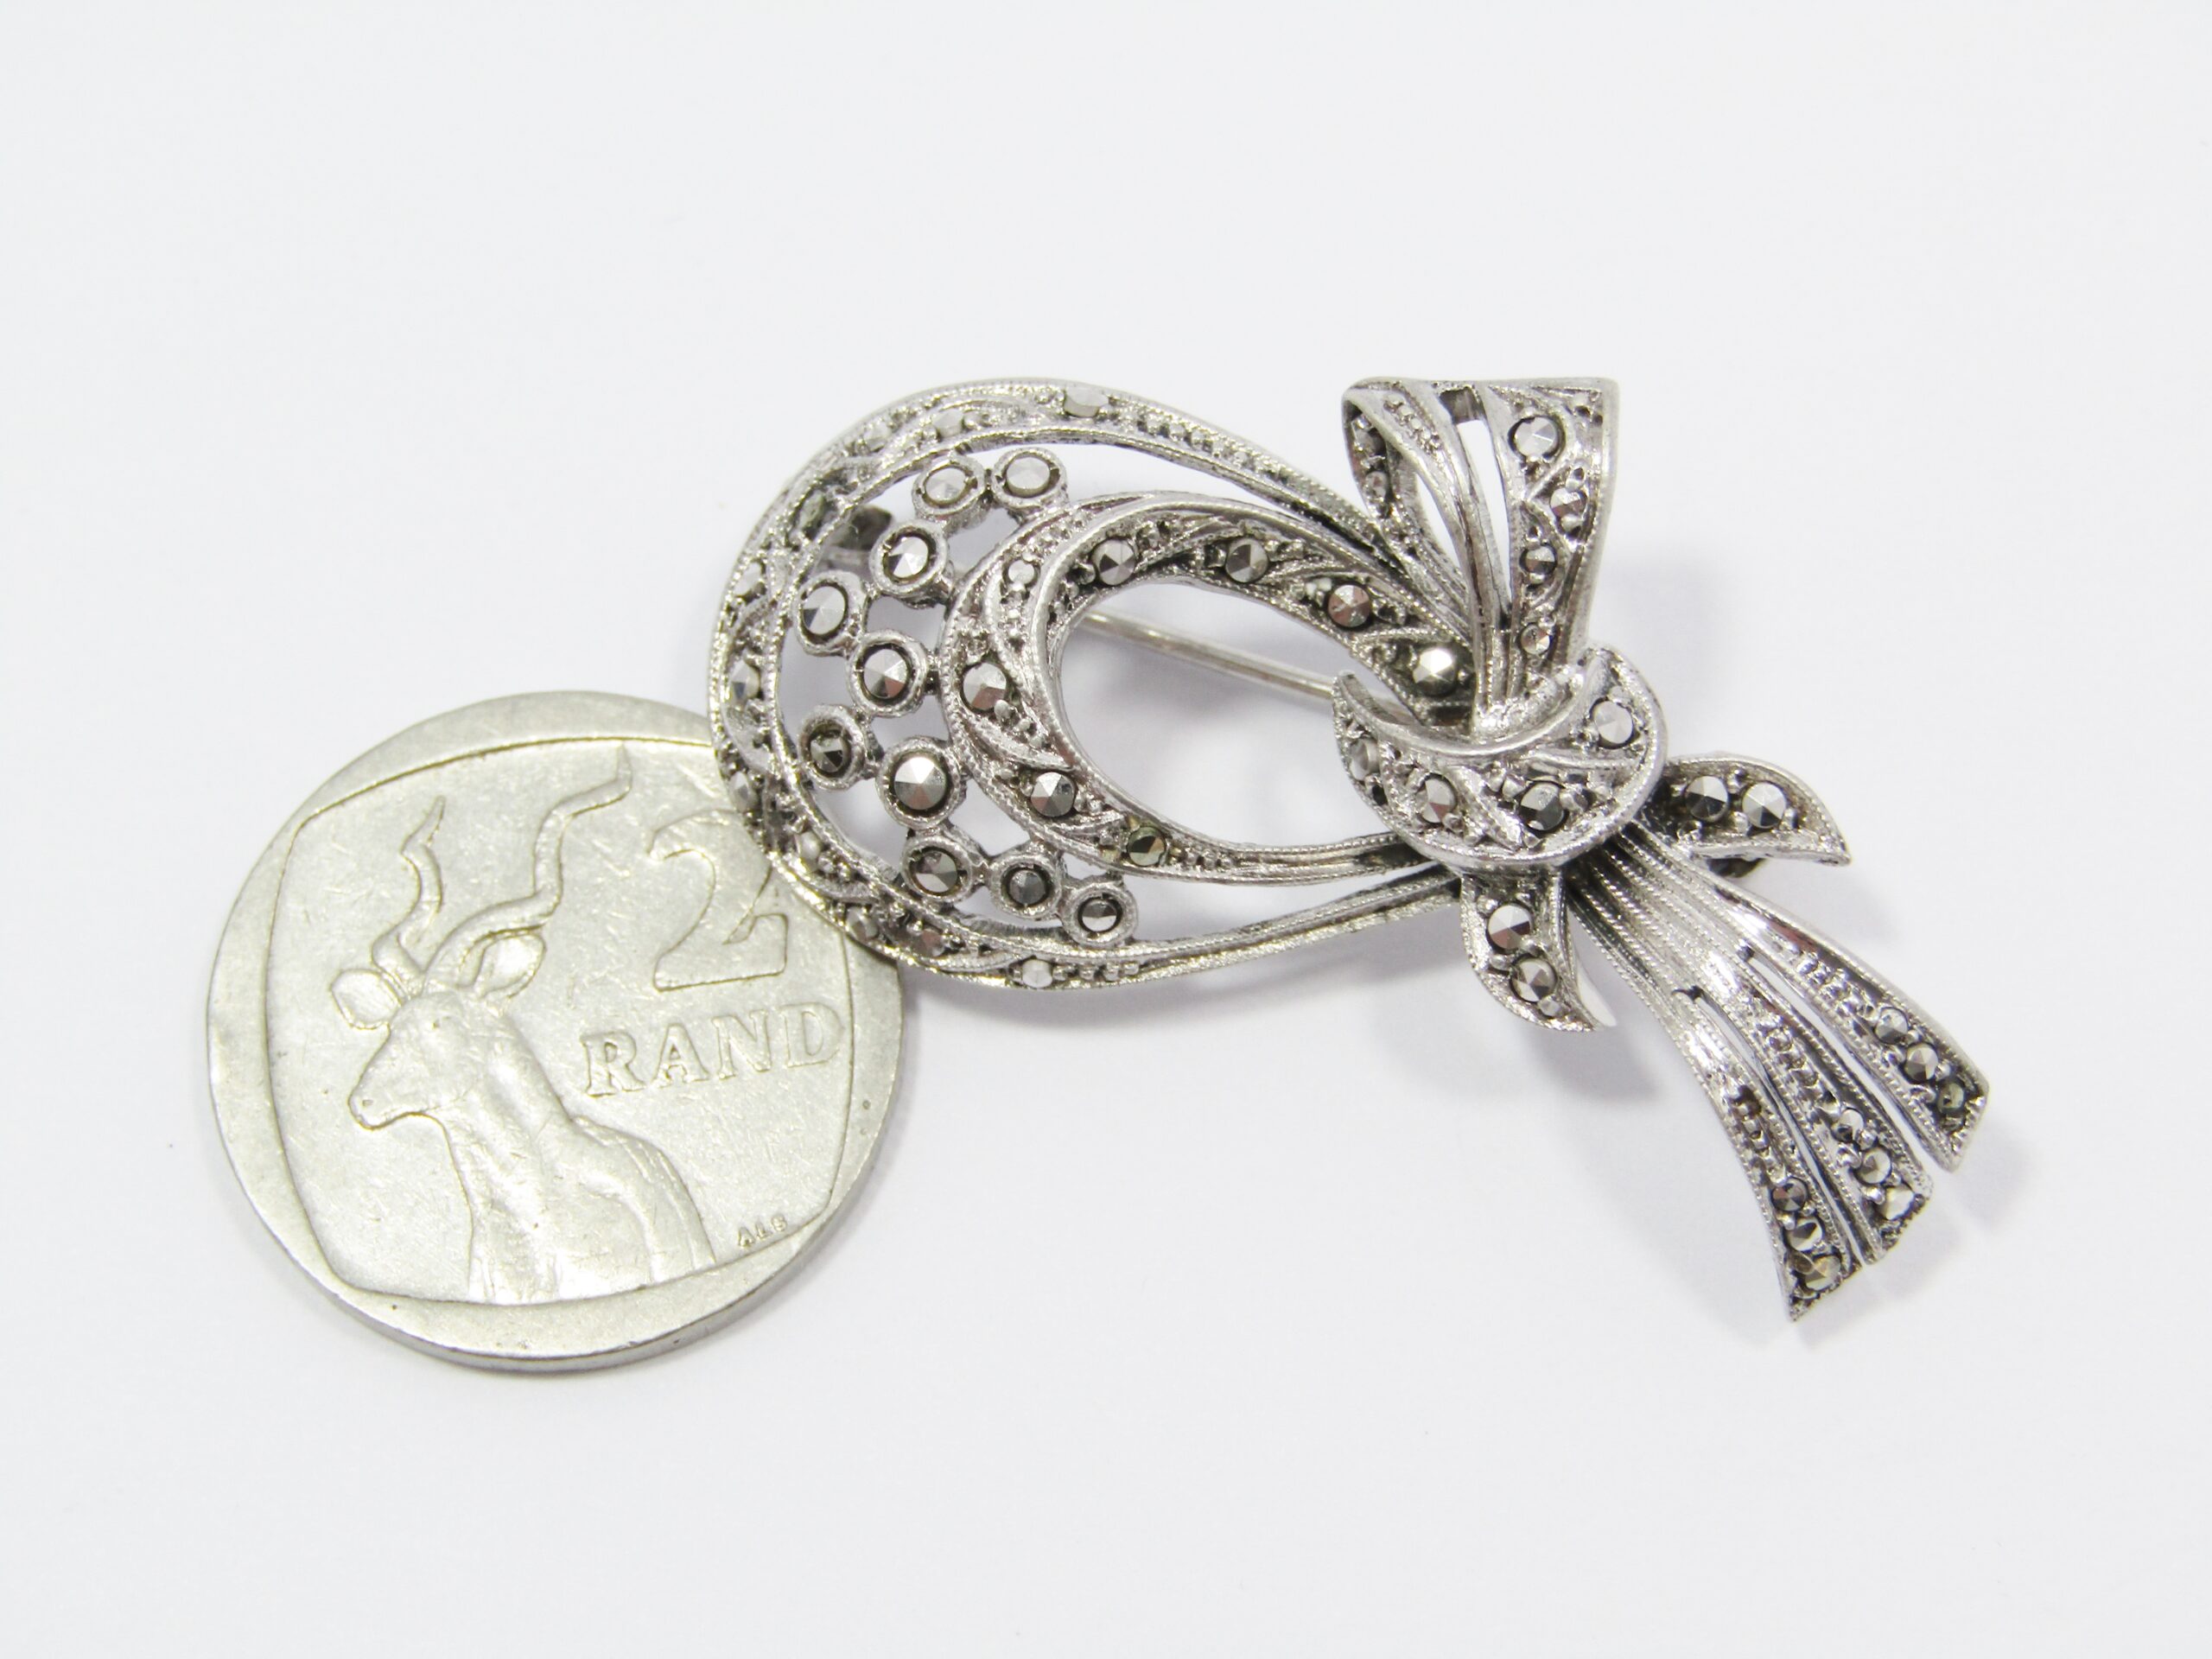 A Gorgeous Vintage Design Ribbon Marcasite Brooch in Sterling Silver